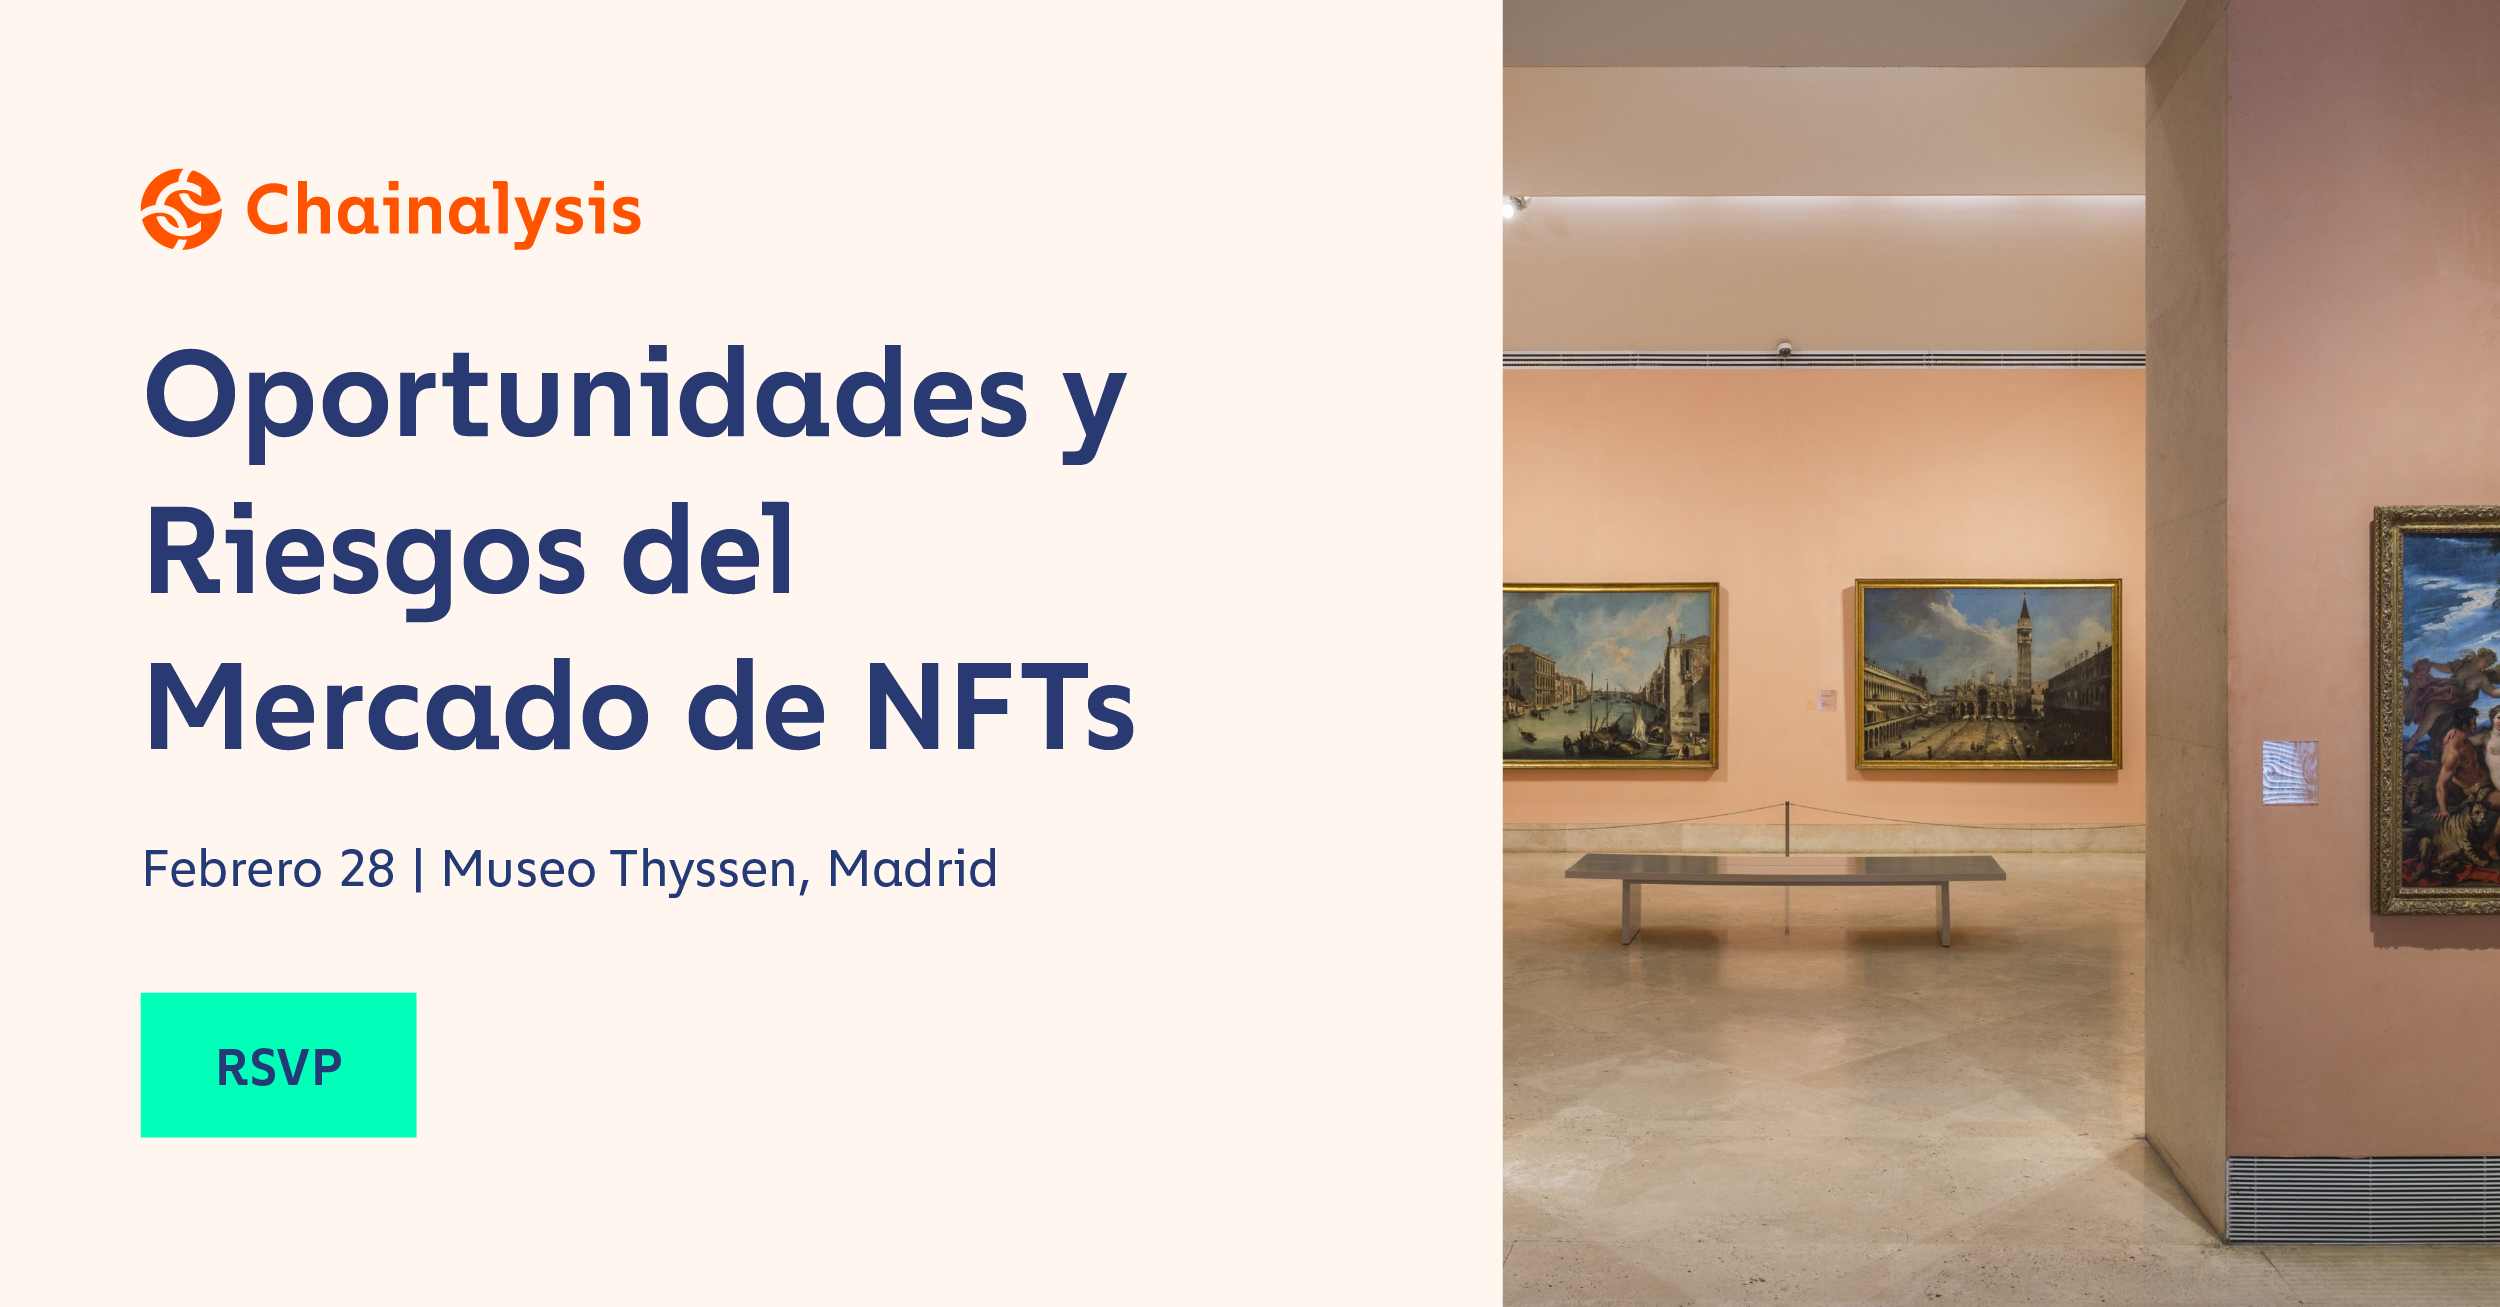 Opportunities and Risks of the NFTs market